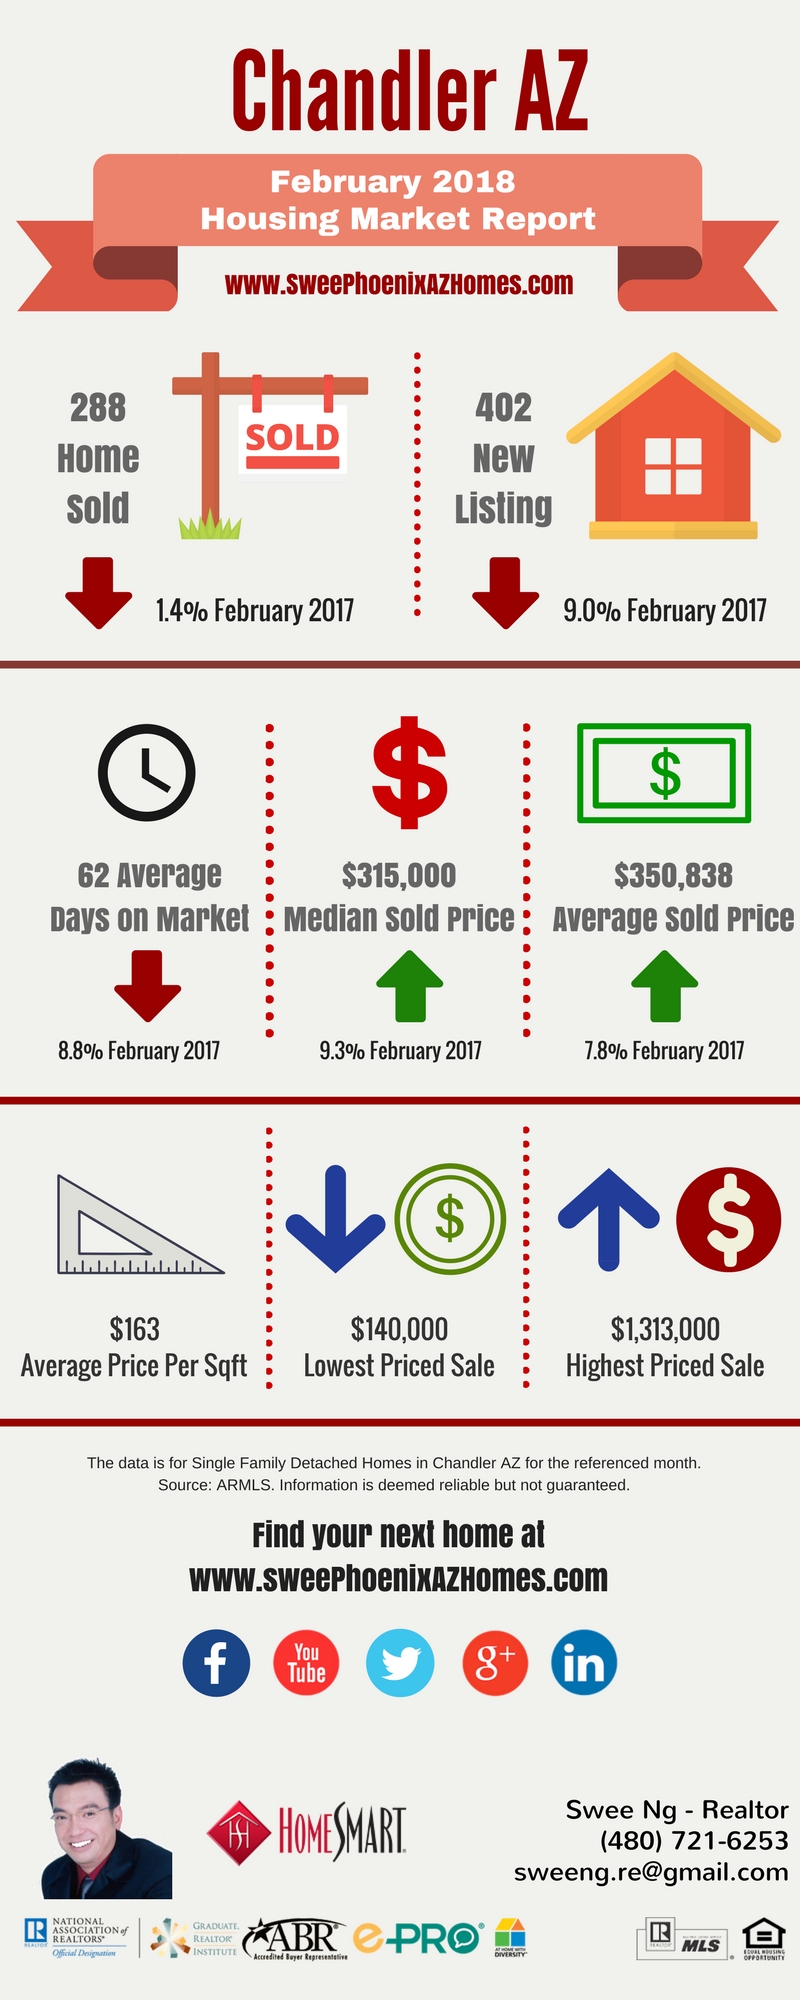 Chandler AZ Housing Market Update February 2018 by Swee Ng, House Value and Real Estate Listings